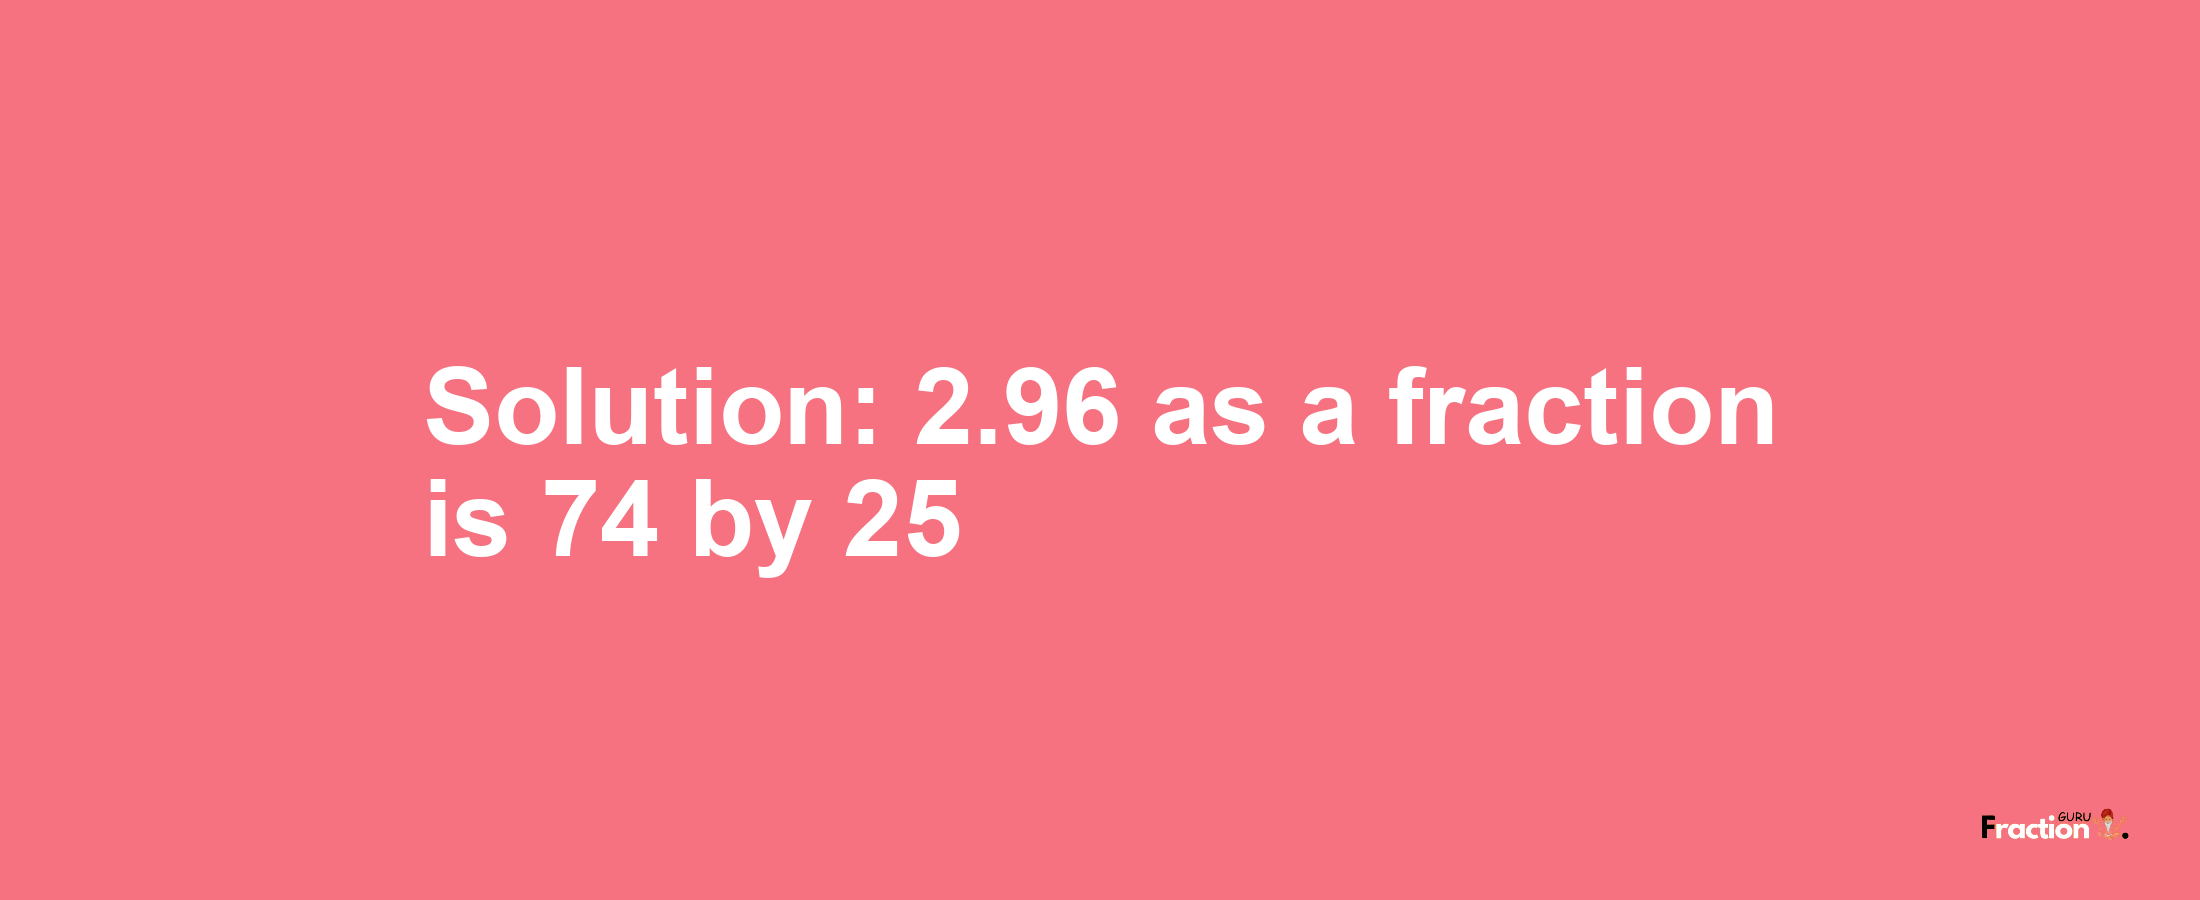 Solution:2.96 as a fraction is 74/25